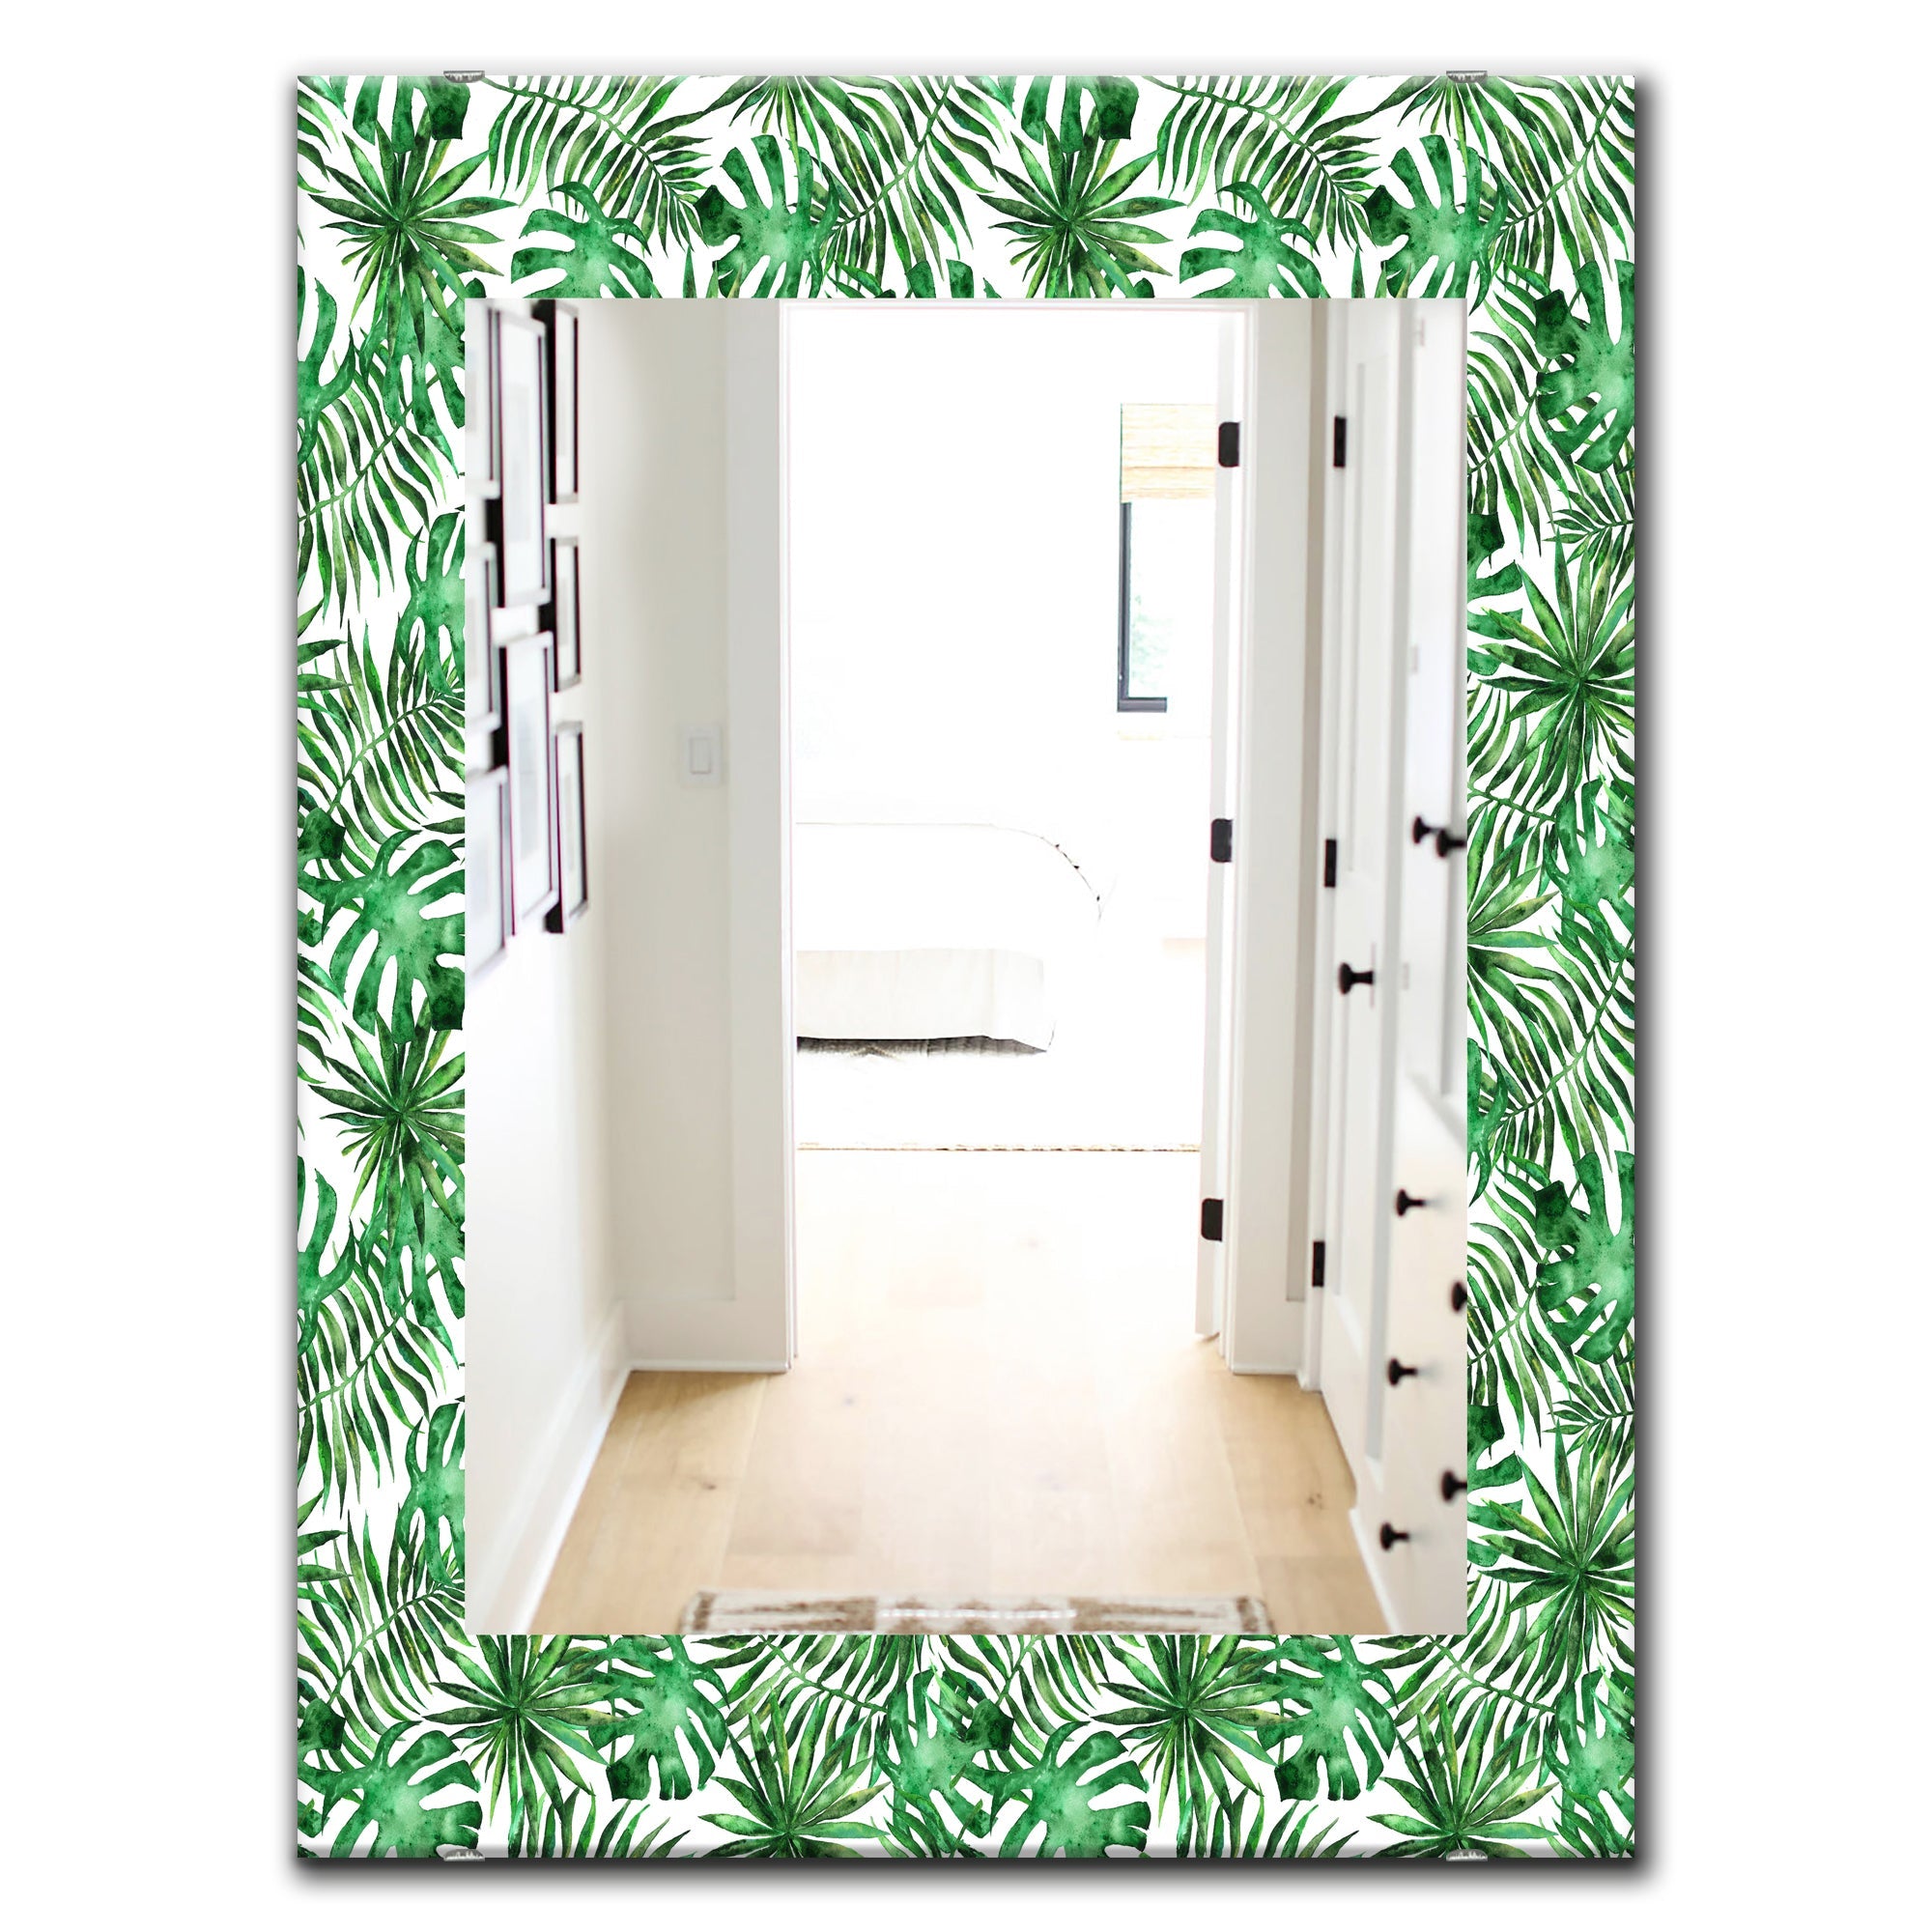 Tropical Mood Foliage 8' Bohemian and Eclectic Mirror - Oval or Round Wall Mirror